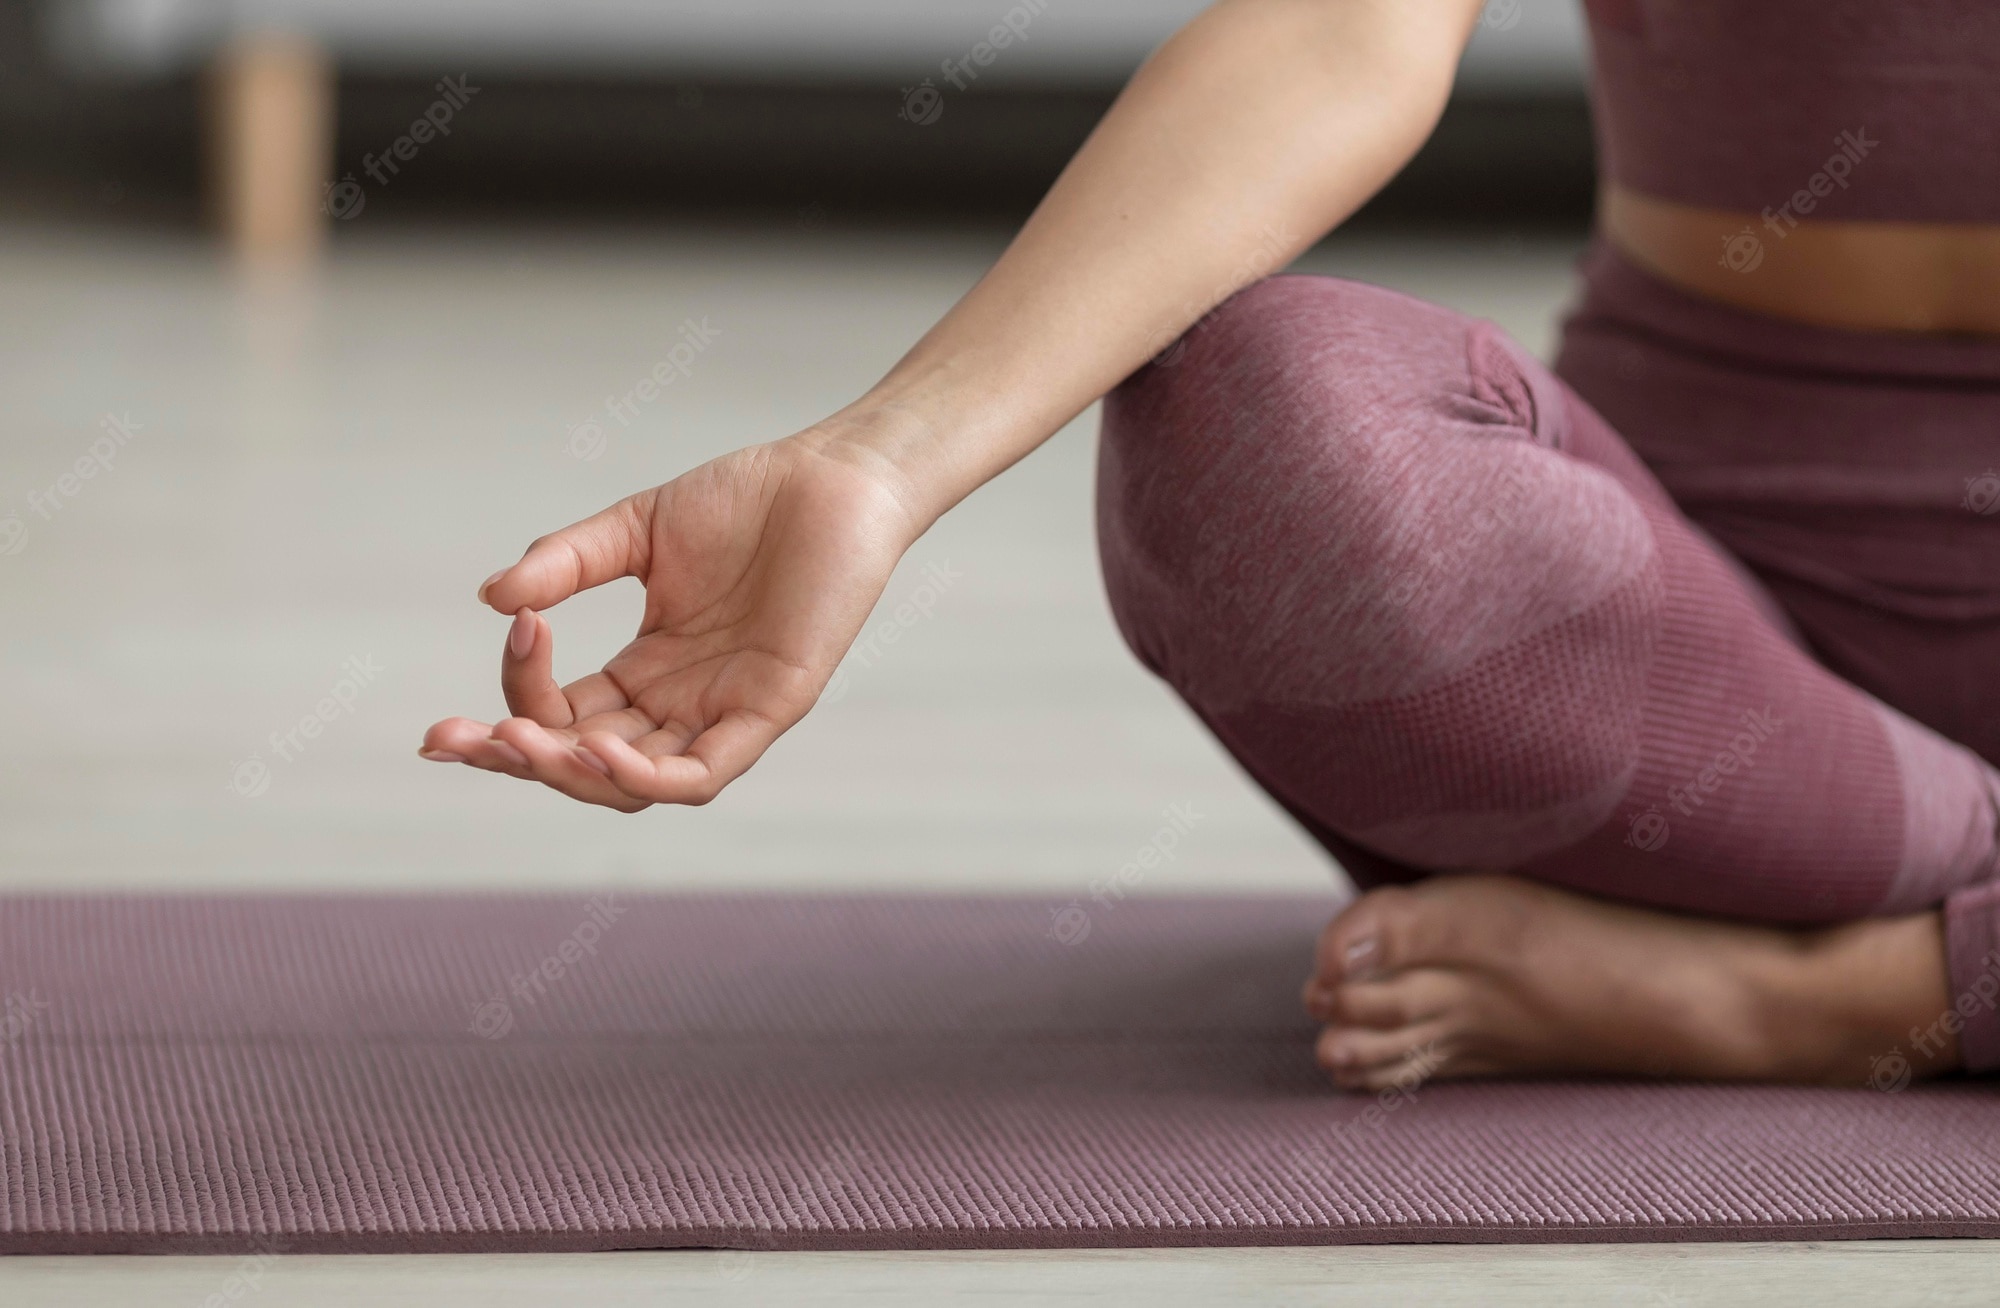 How To Locate A Yoga Mat That meets your needs post thumbnail image